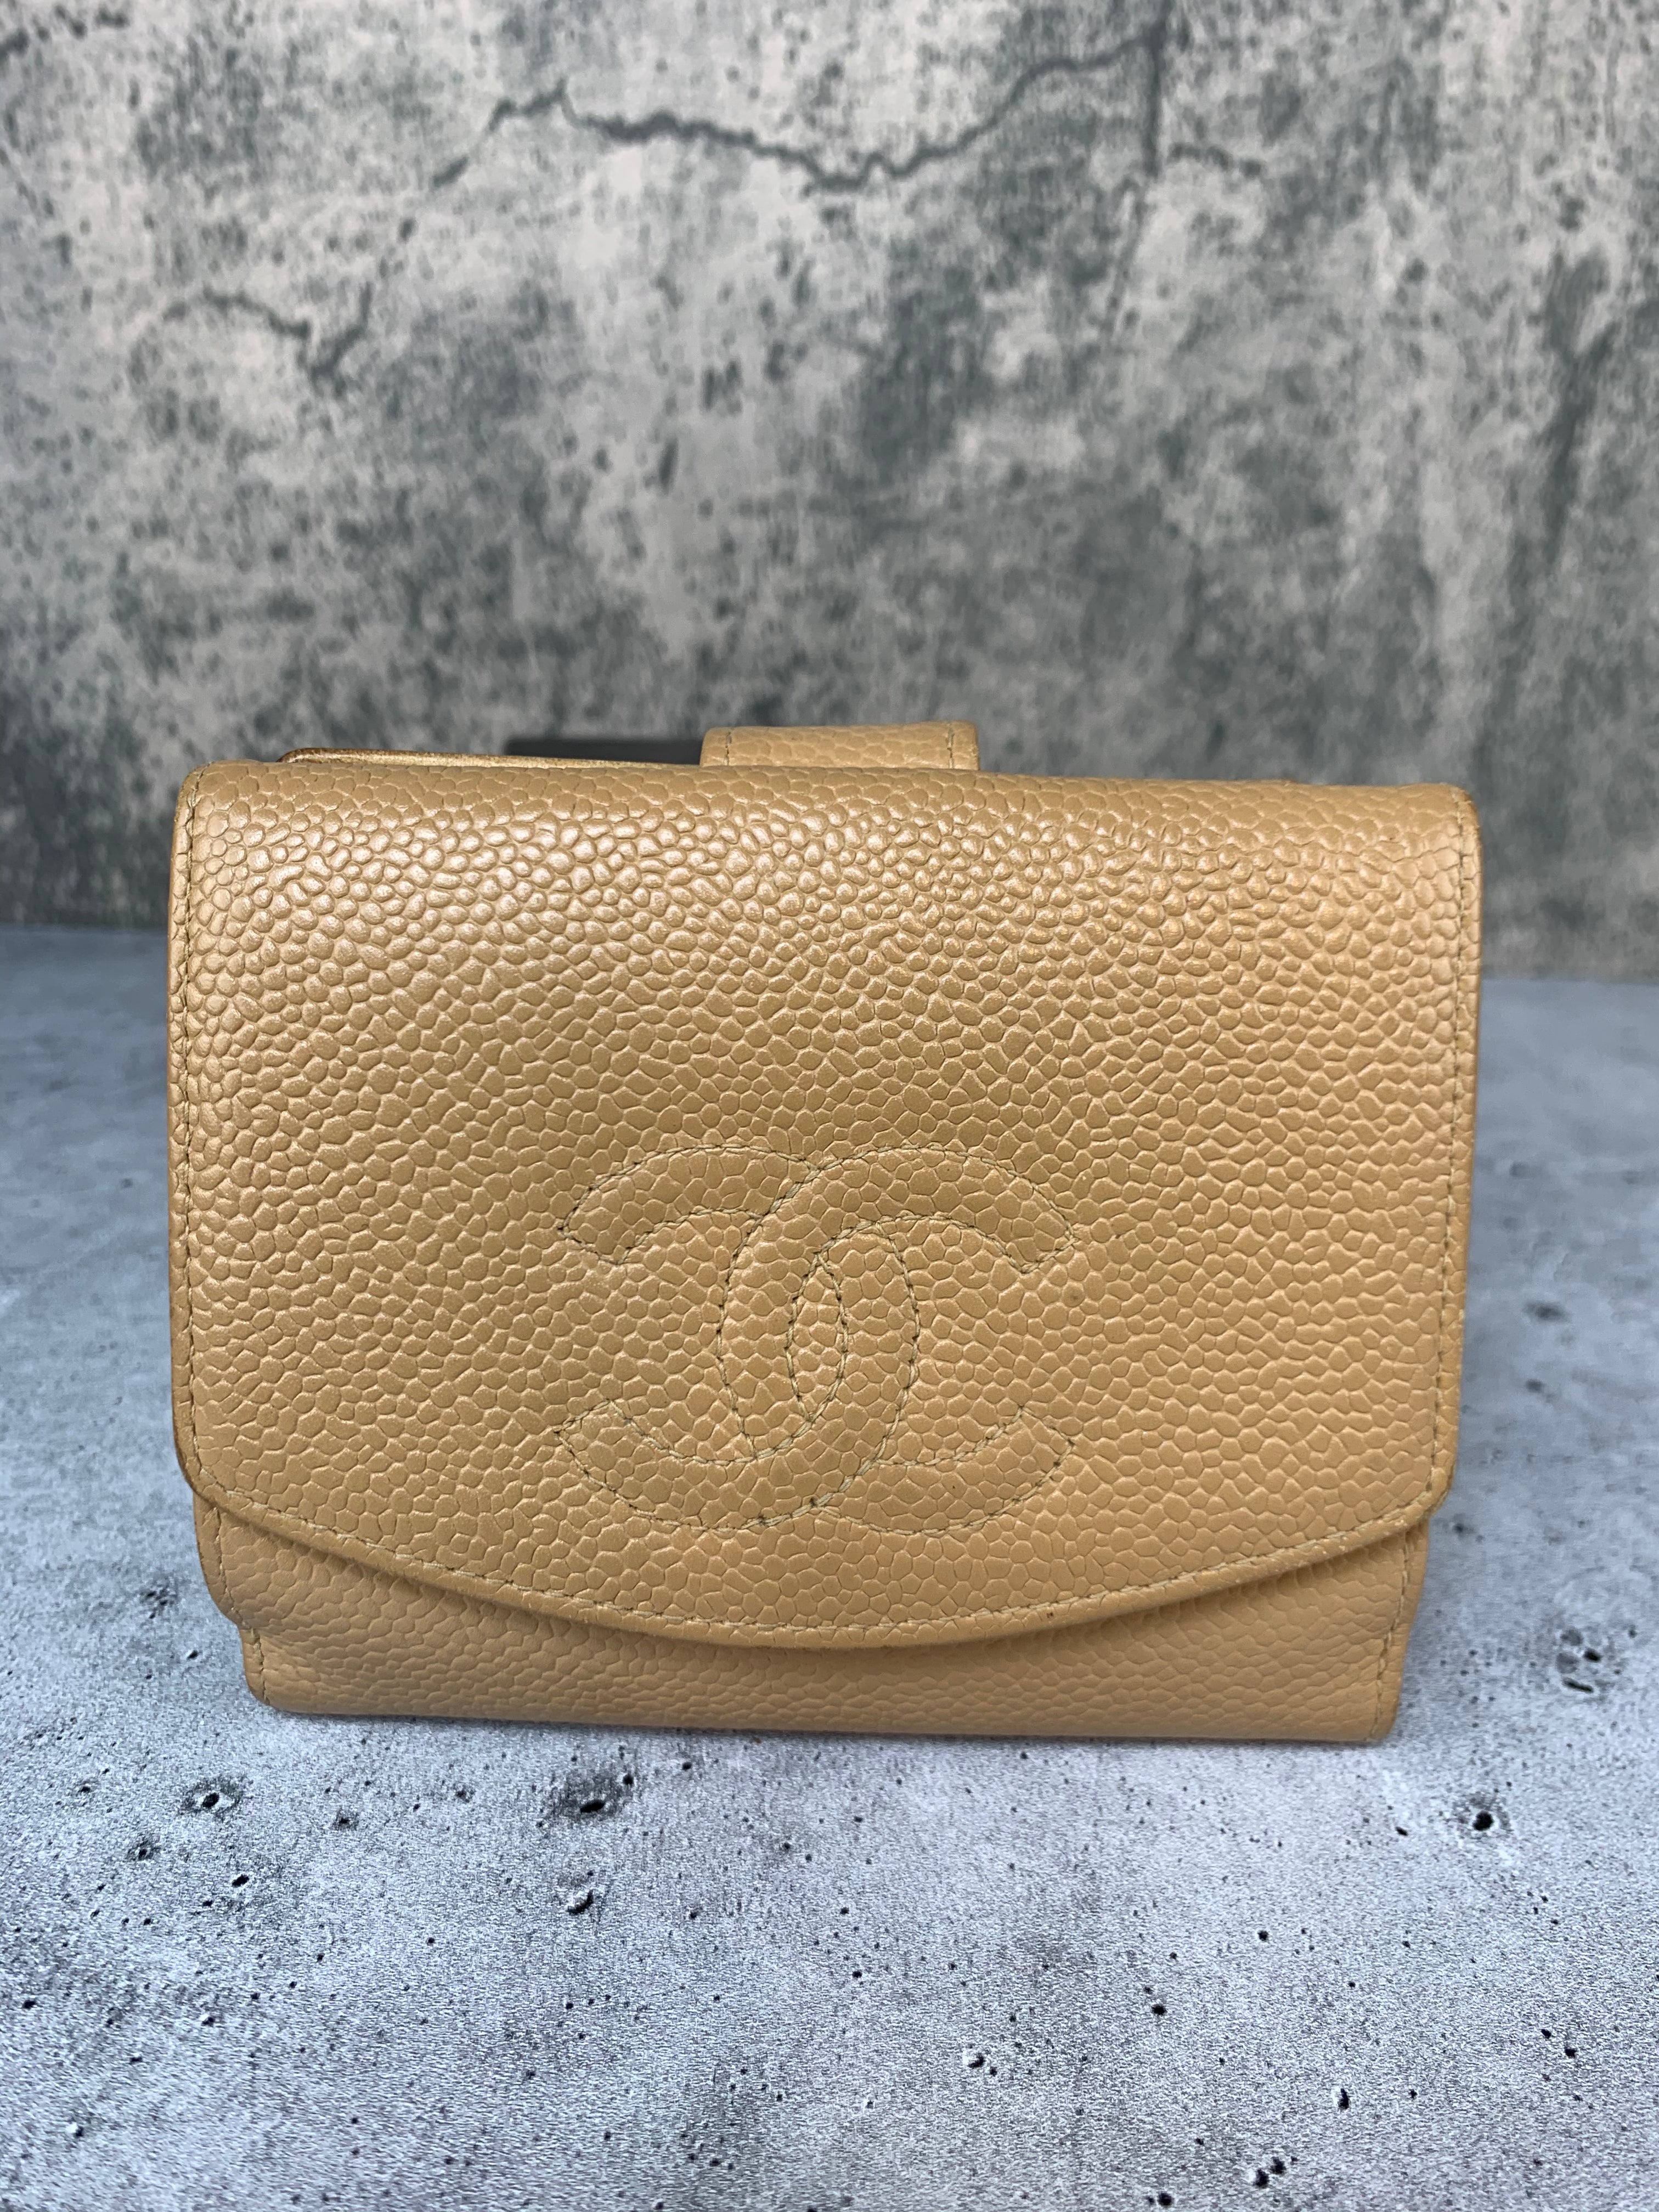 white and gold chanel purse authentic